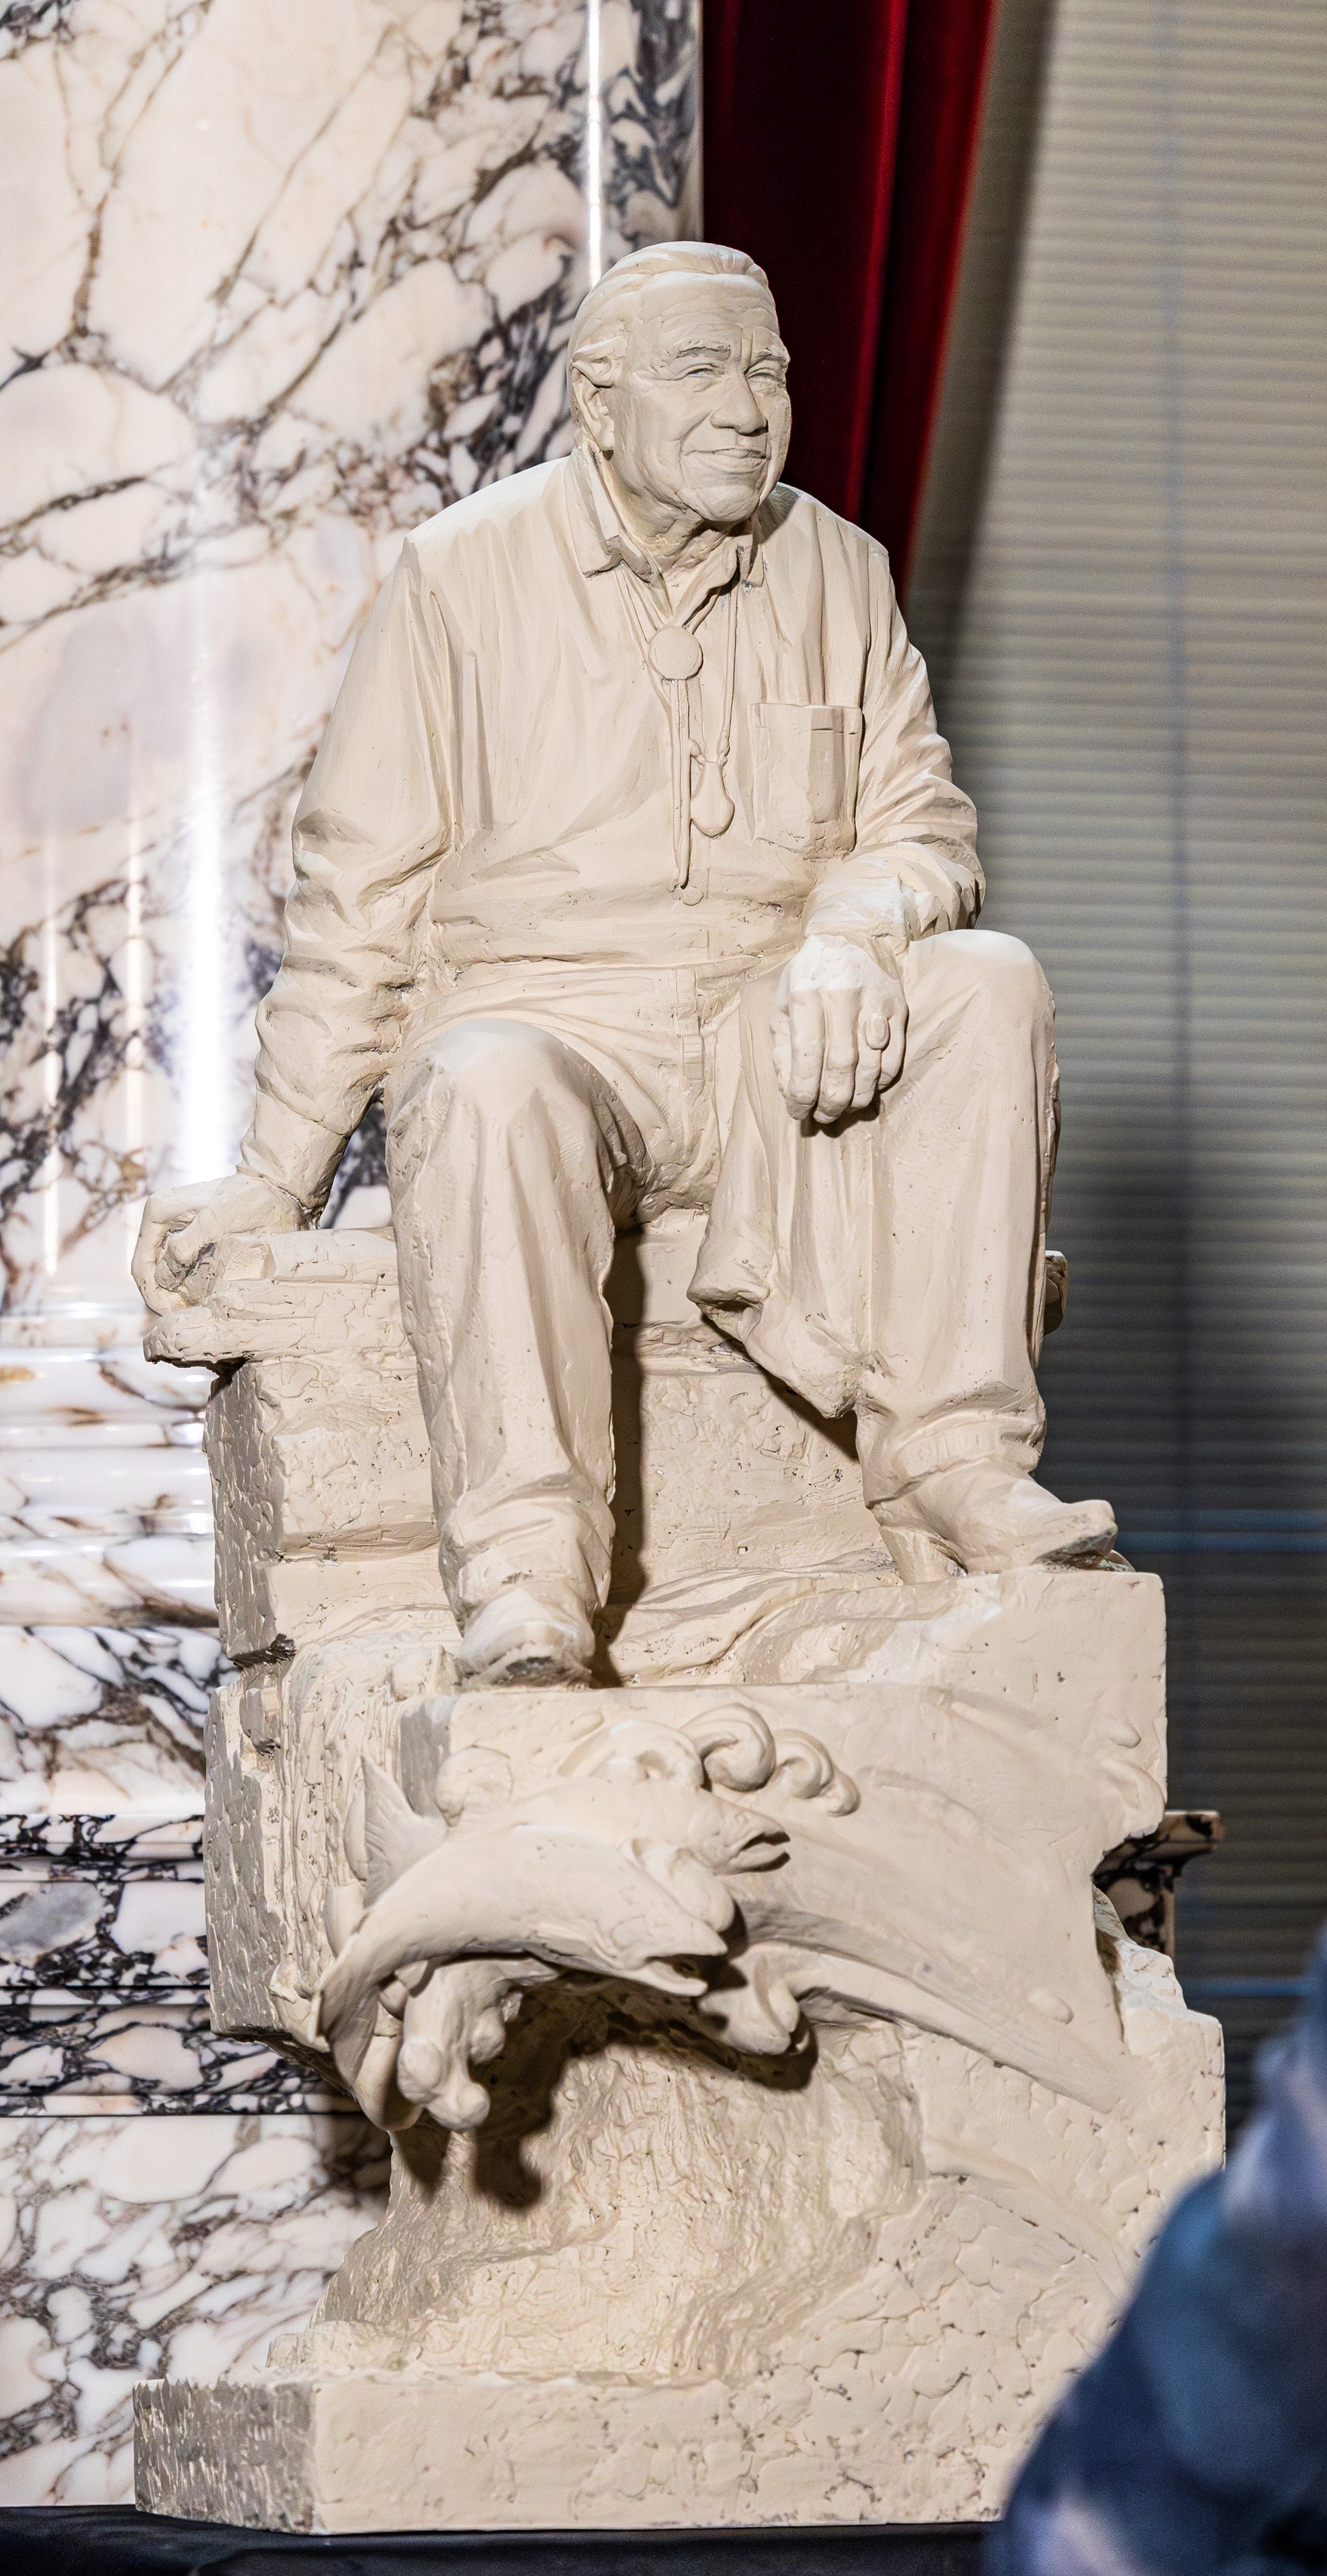 This replica will stay on display in Washington, while the full, 9-foot statue will represent our state in the National Statuary Hall Collection. (COURTESY: WA Leg Photography)